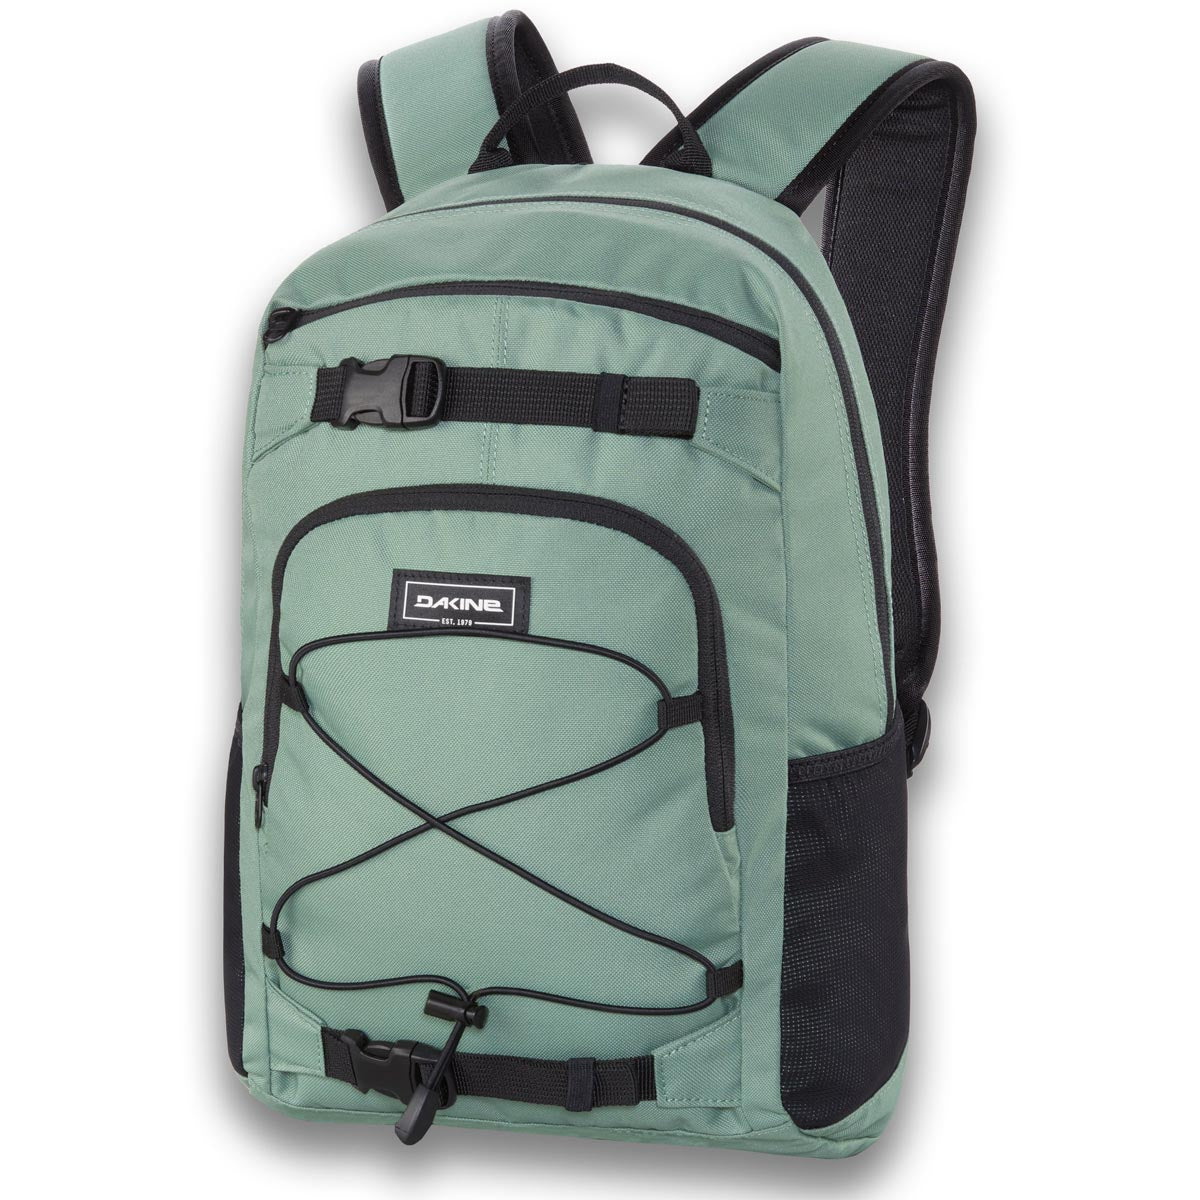 Dakine Youth Grom 13l Backpack - Ivy image 1